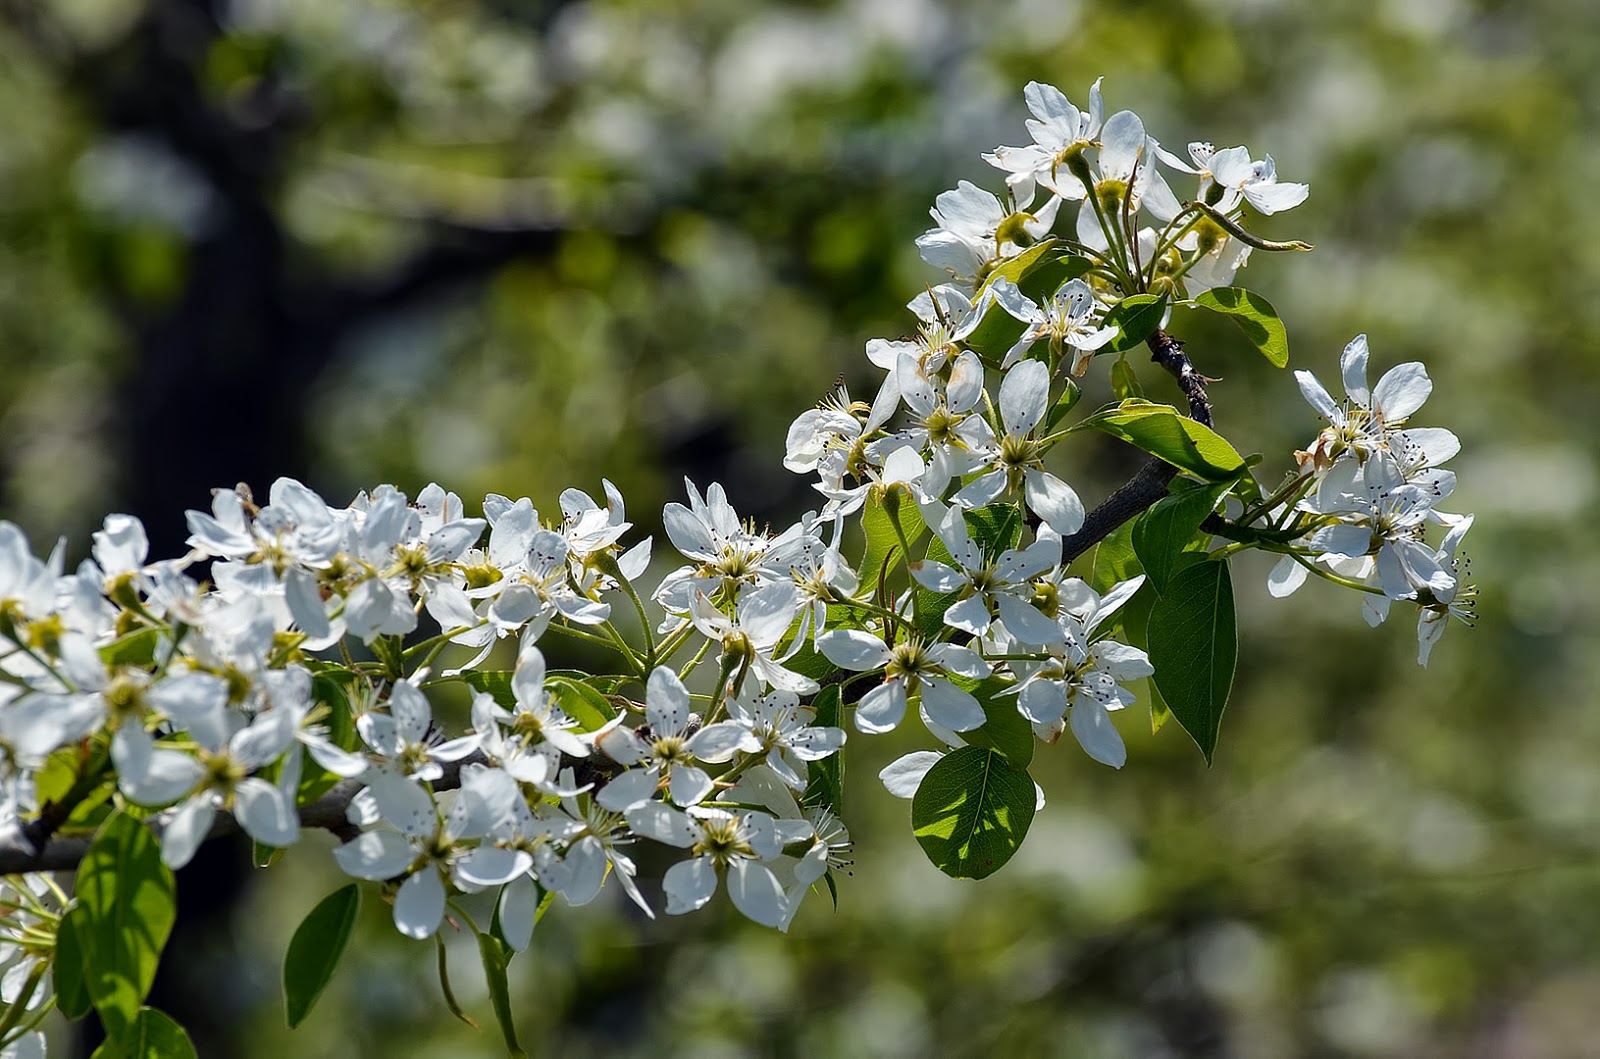 Love blooming pear. Pear Blossom. Pears Blossom Flowers.